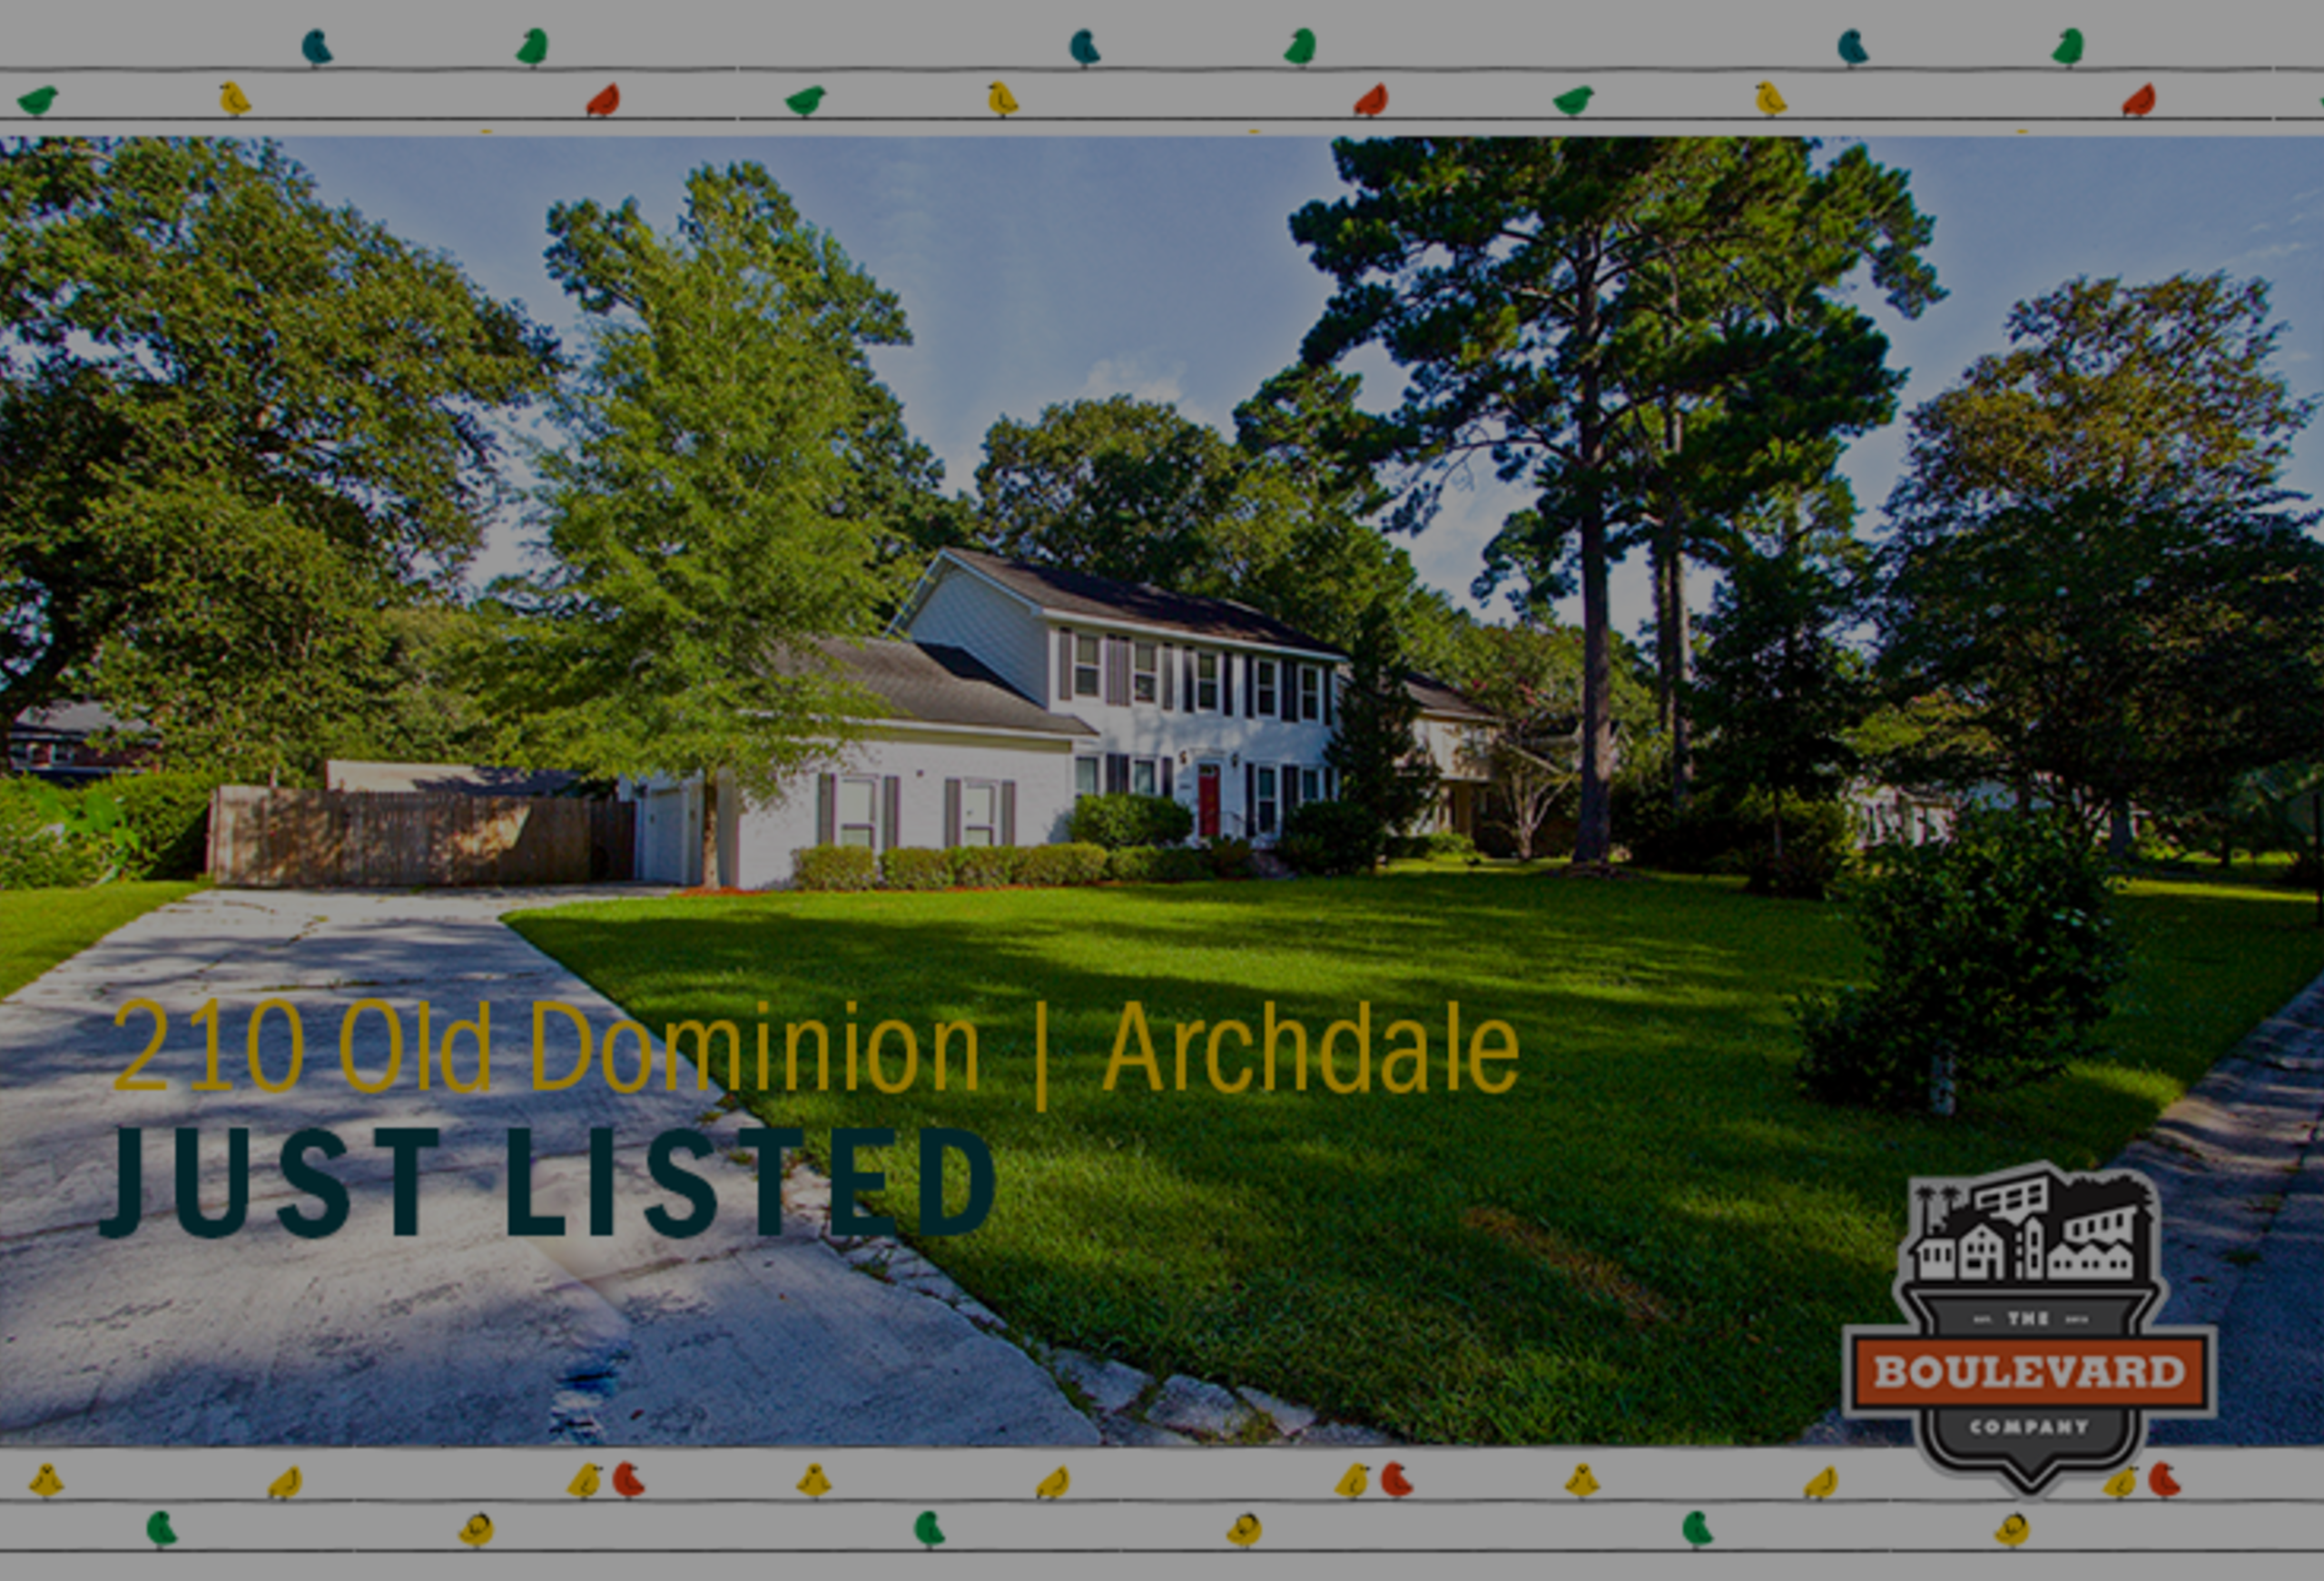 new listing: 210 Old Dominion in Archdale